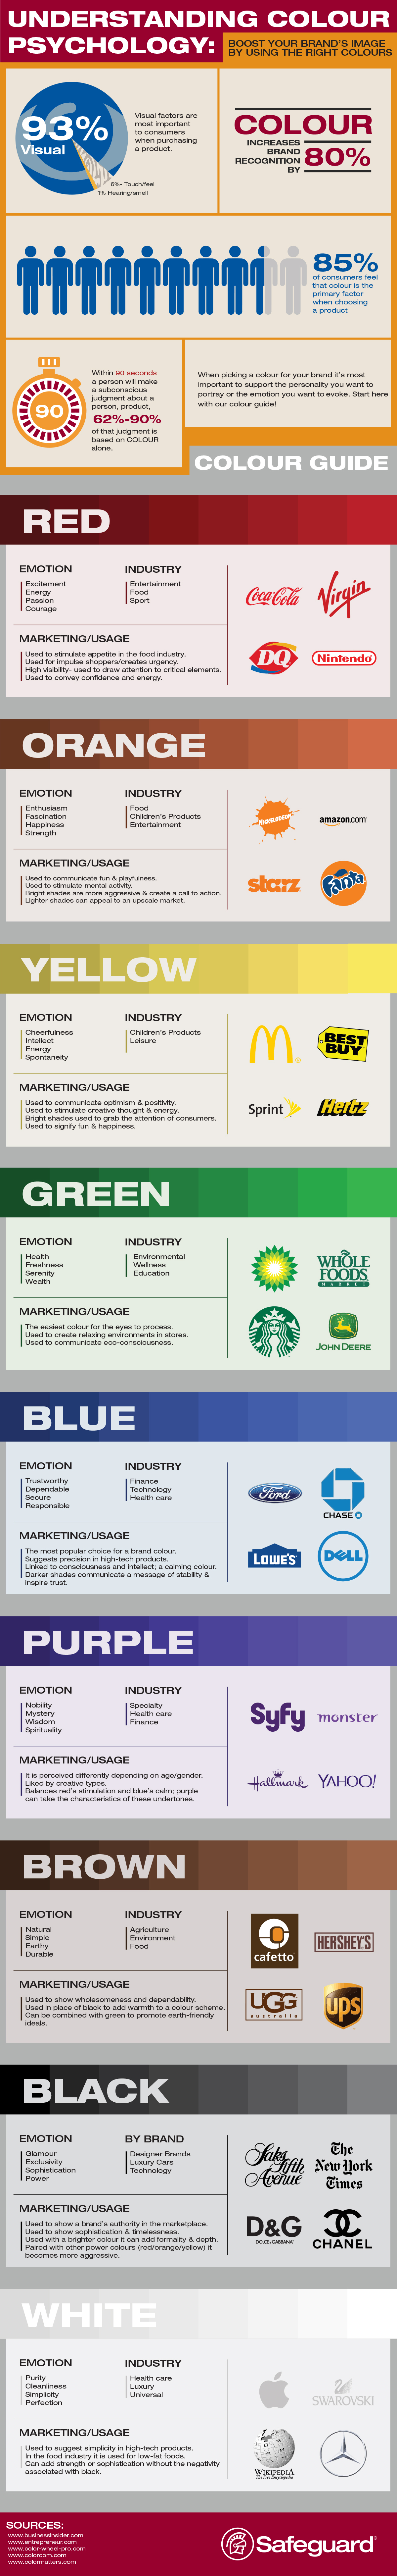 What can colour do for your brand?